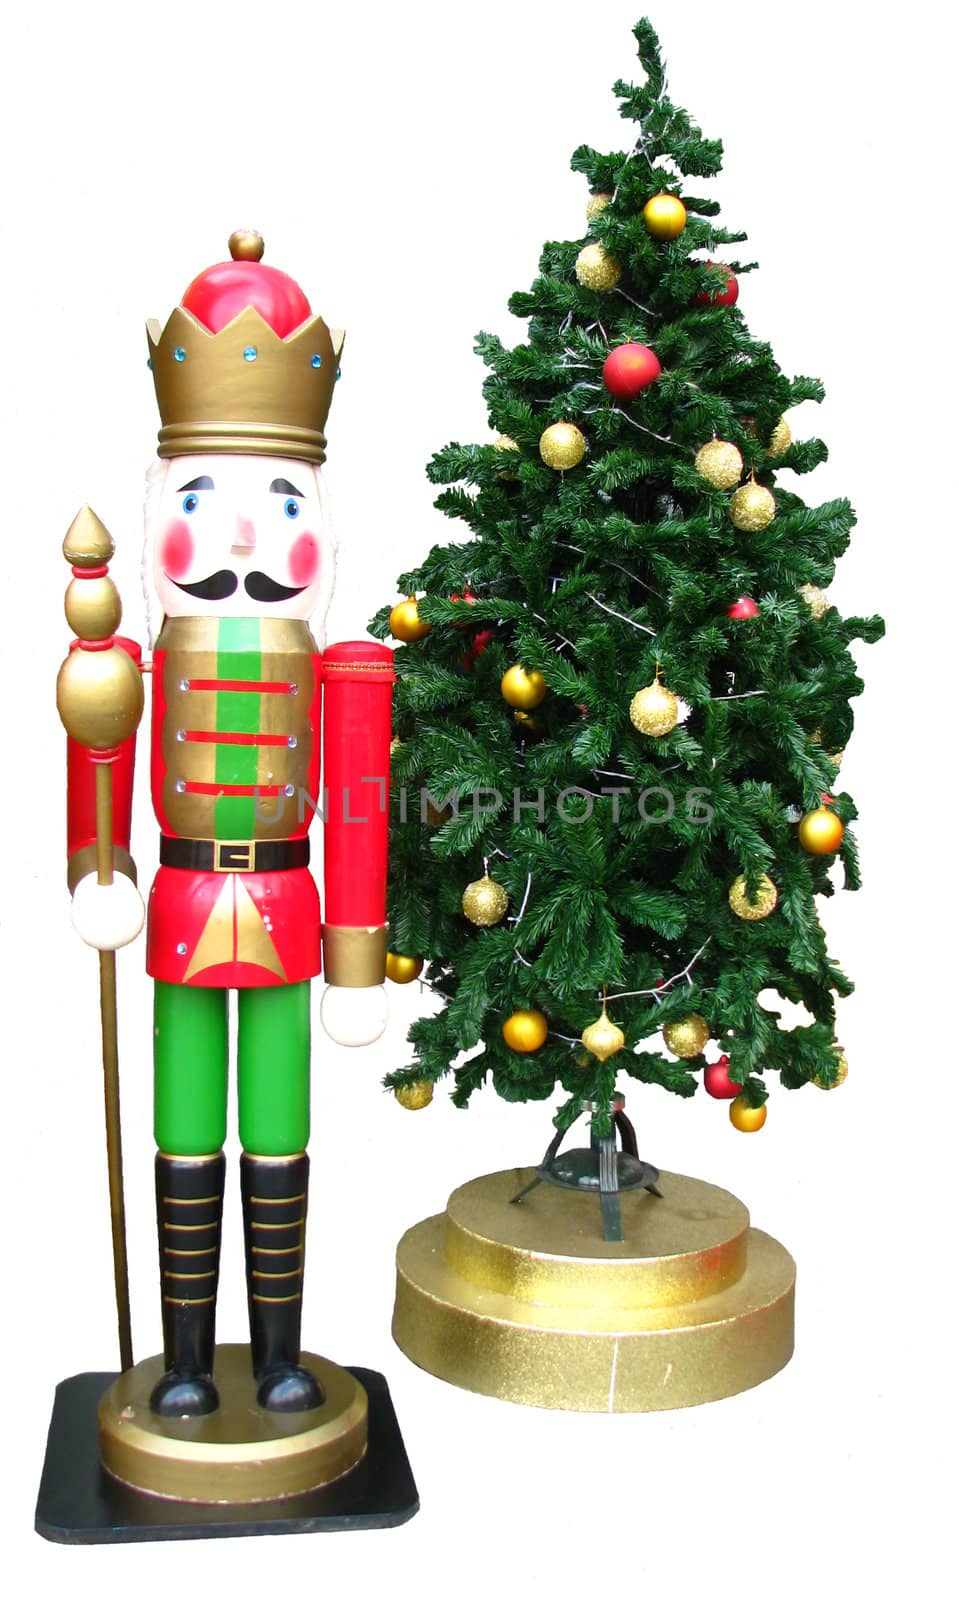 King toy and Christmas Tree with balls on white background 